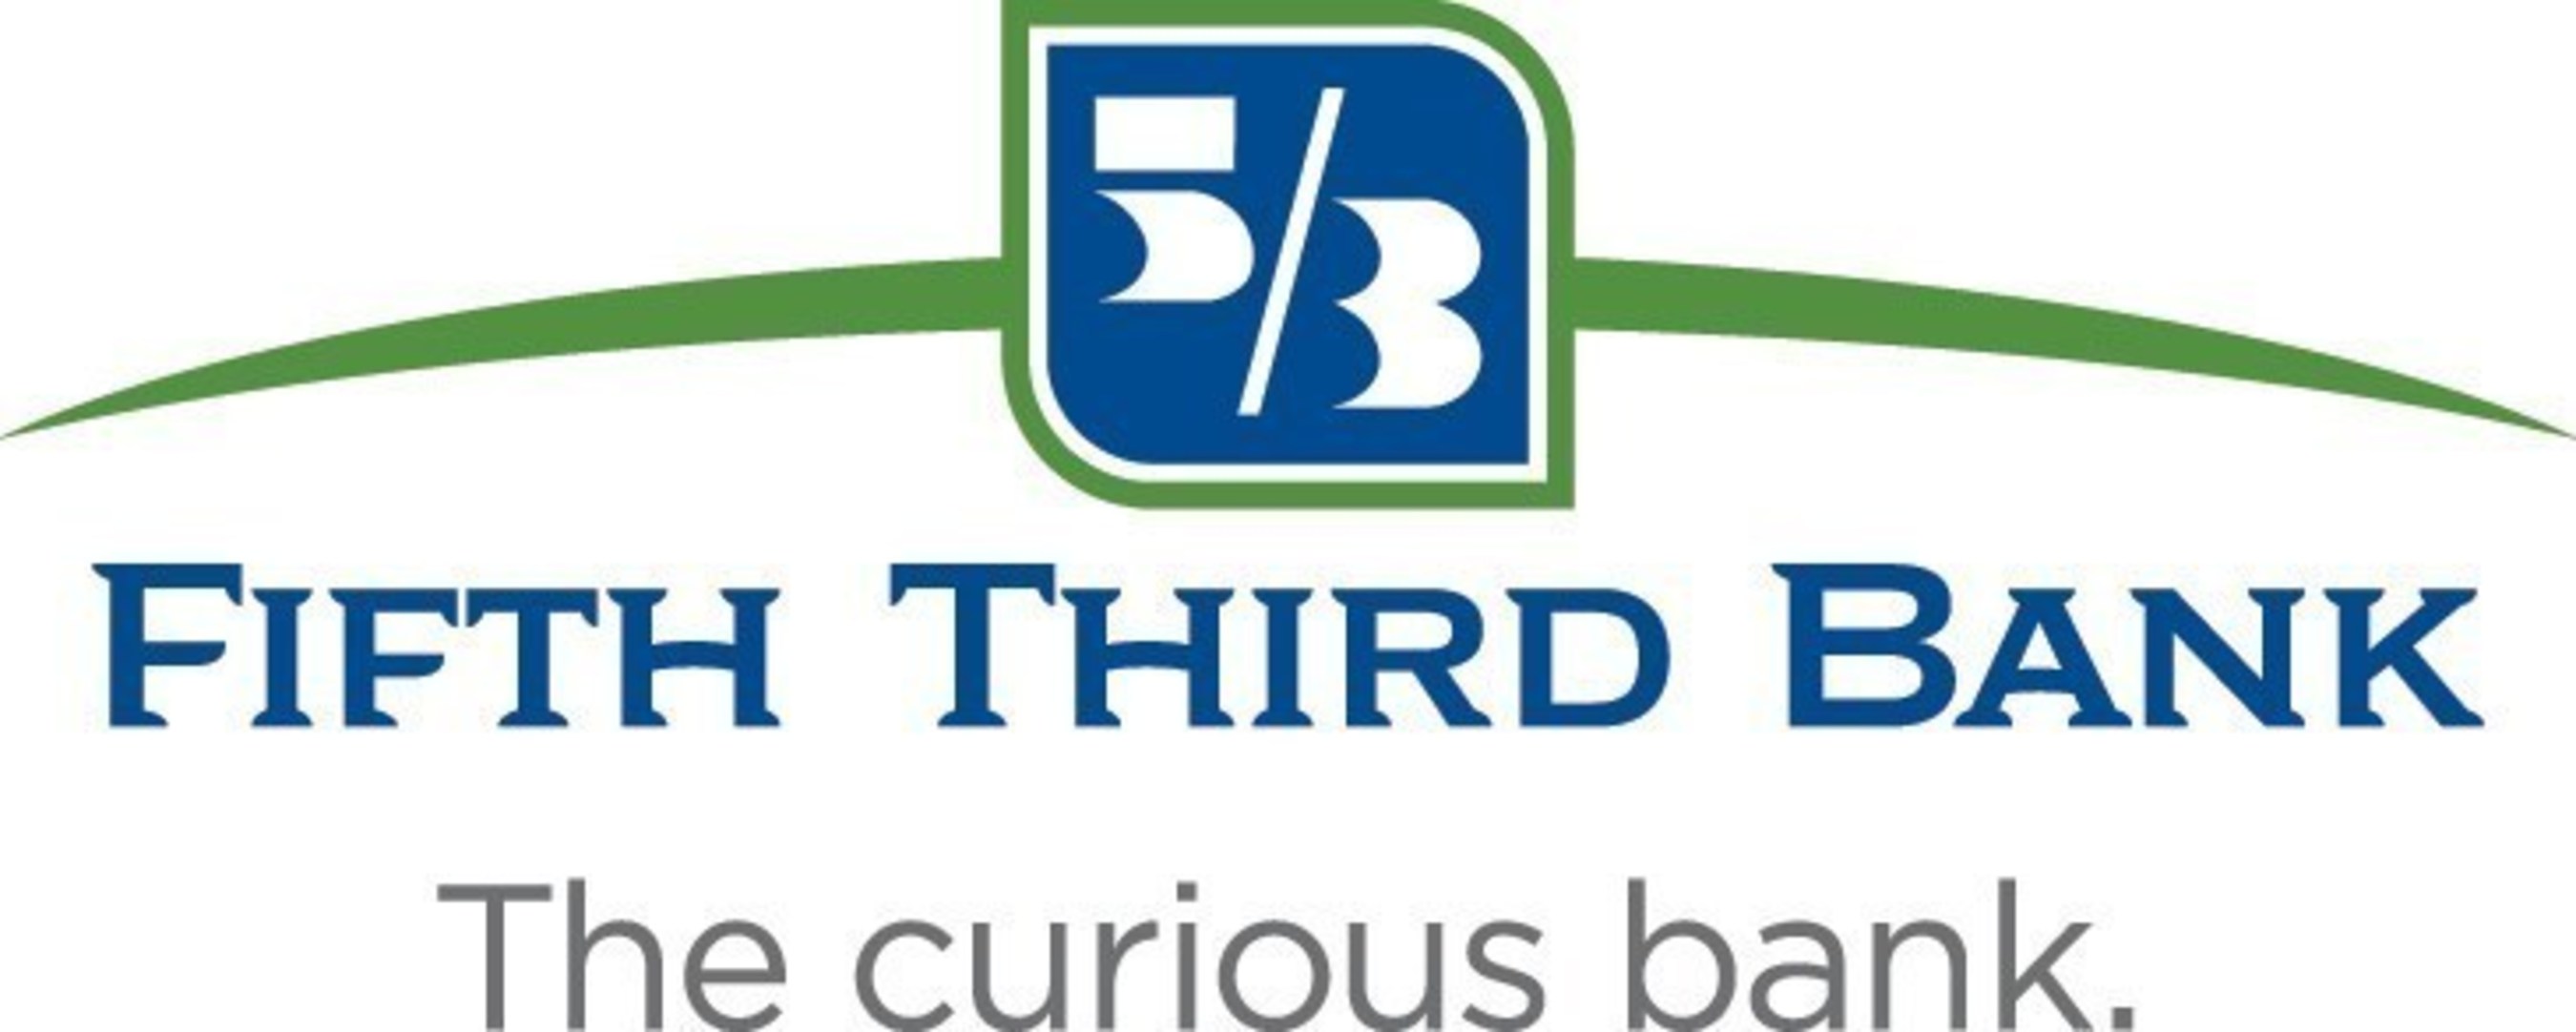 Fifth Third Bank Credit Card | See Its Benefits and How to Apply